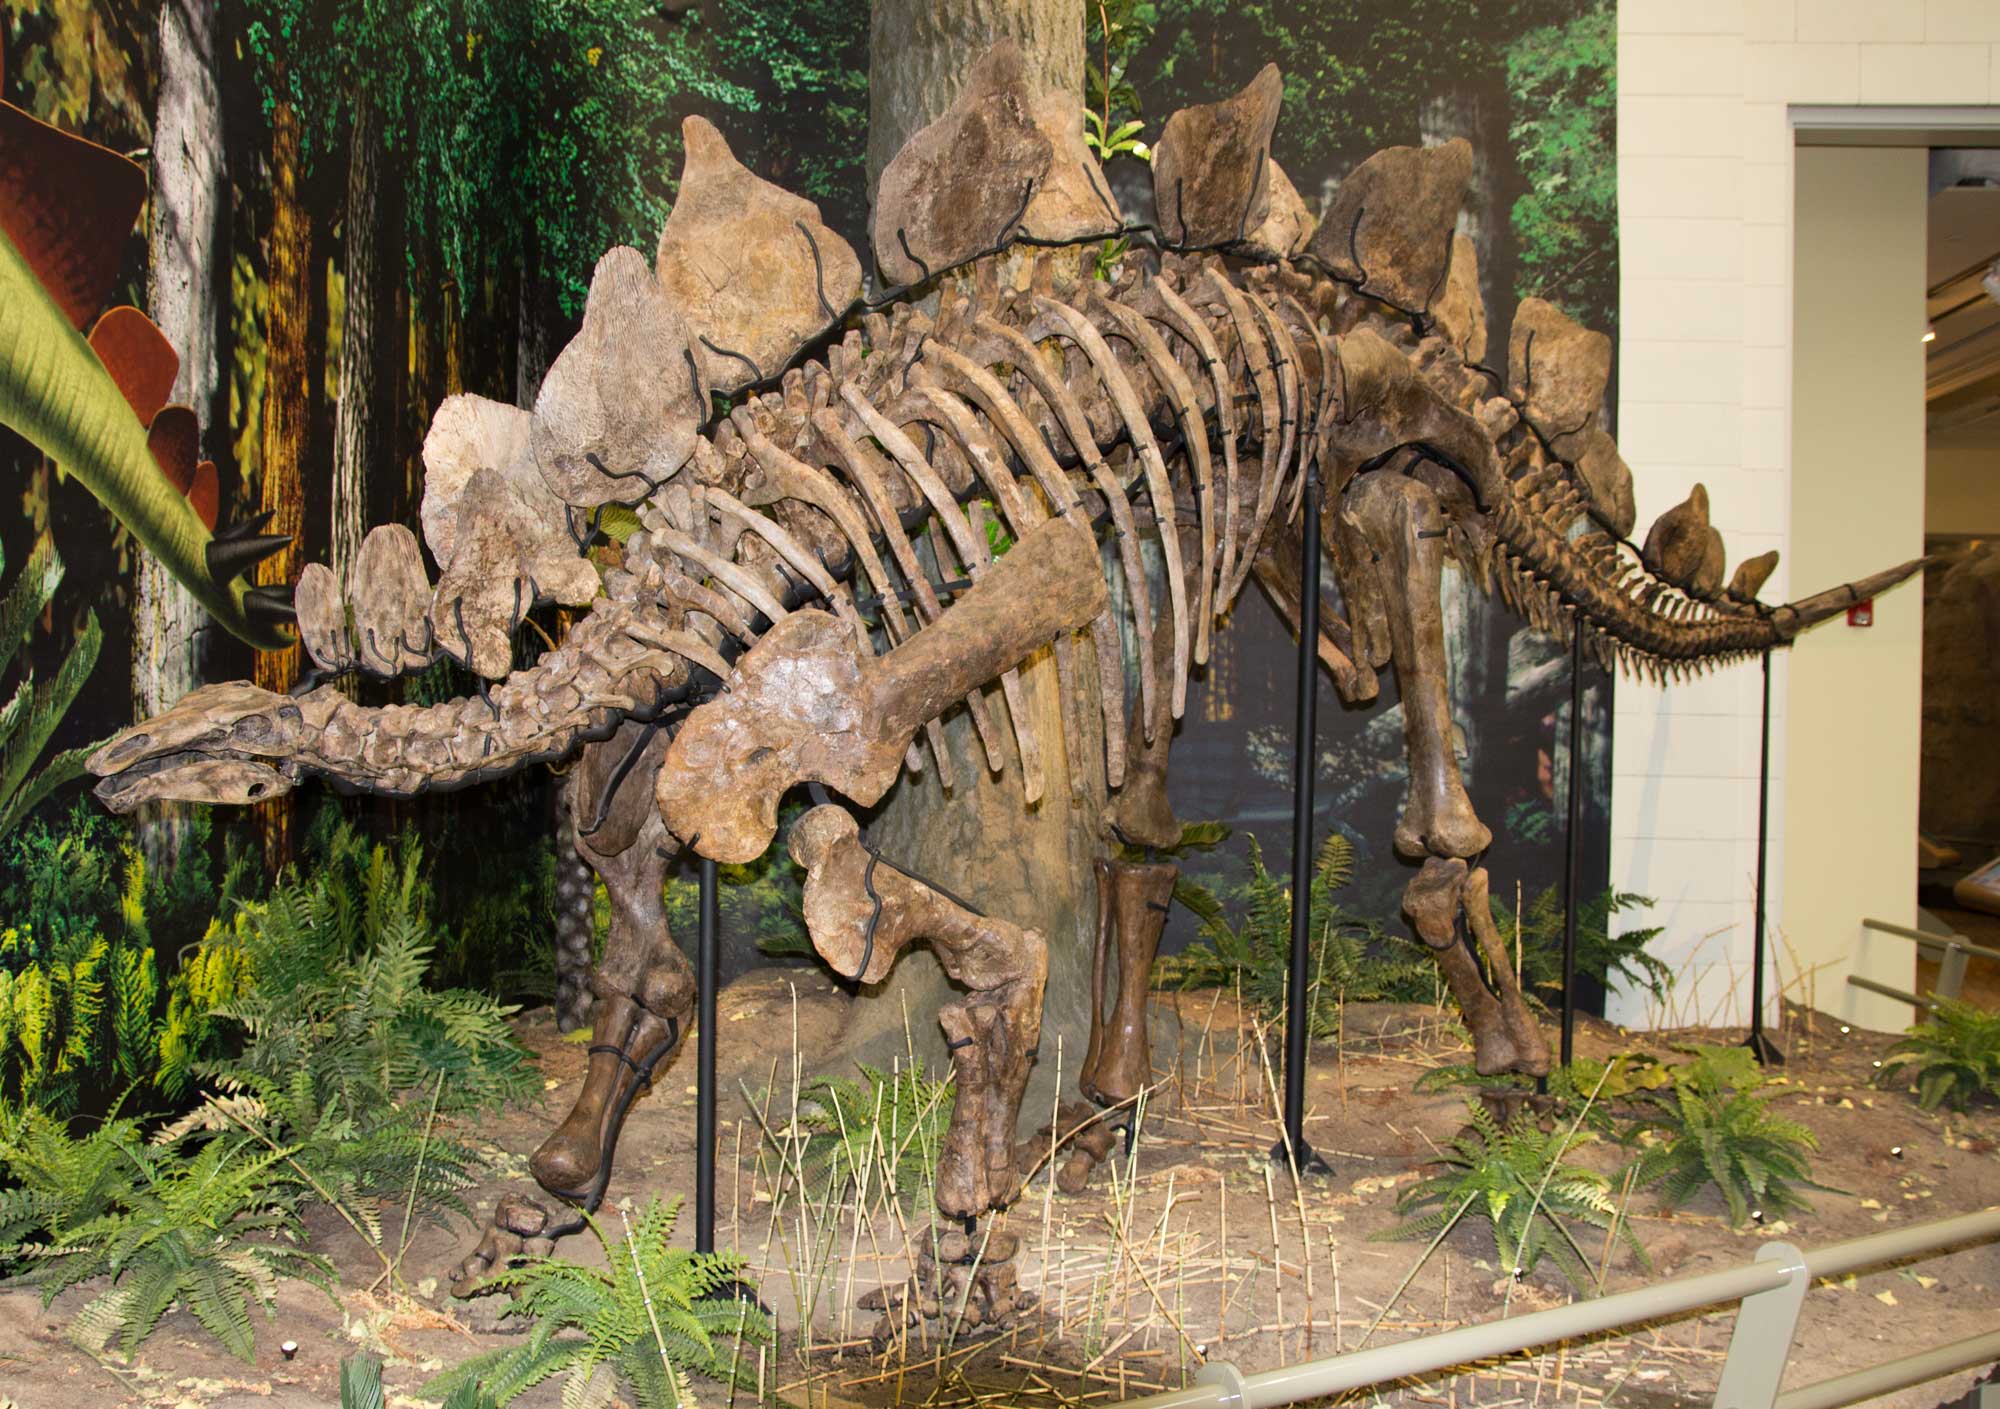 Photograph of the skeleton of Stegosaurus ungulatus on display in a museum. Stegosaurus is a four-legged, plant-eating dinosaur. It has a small head. Its most distinctive feature is two rows of large, bony plates that stick up from its back. Stegosaurus also typically as tail spikes, although they appear to be absent in this specimen.